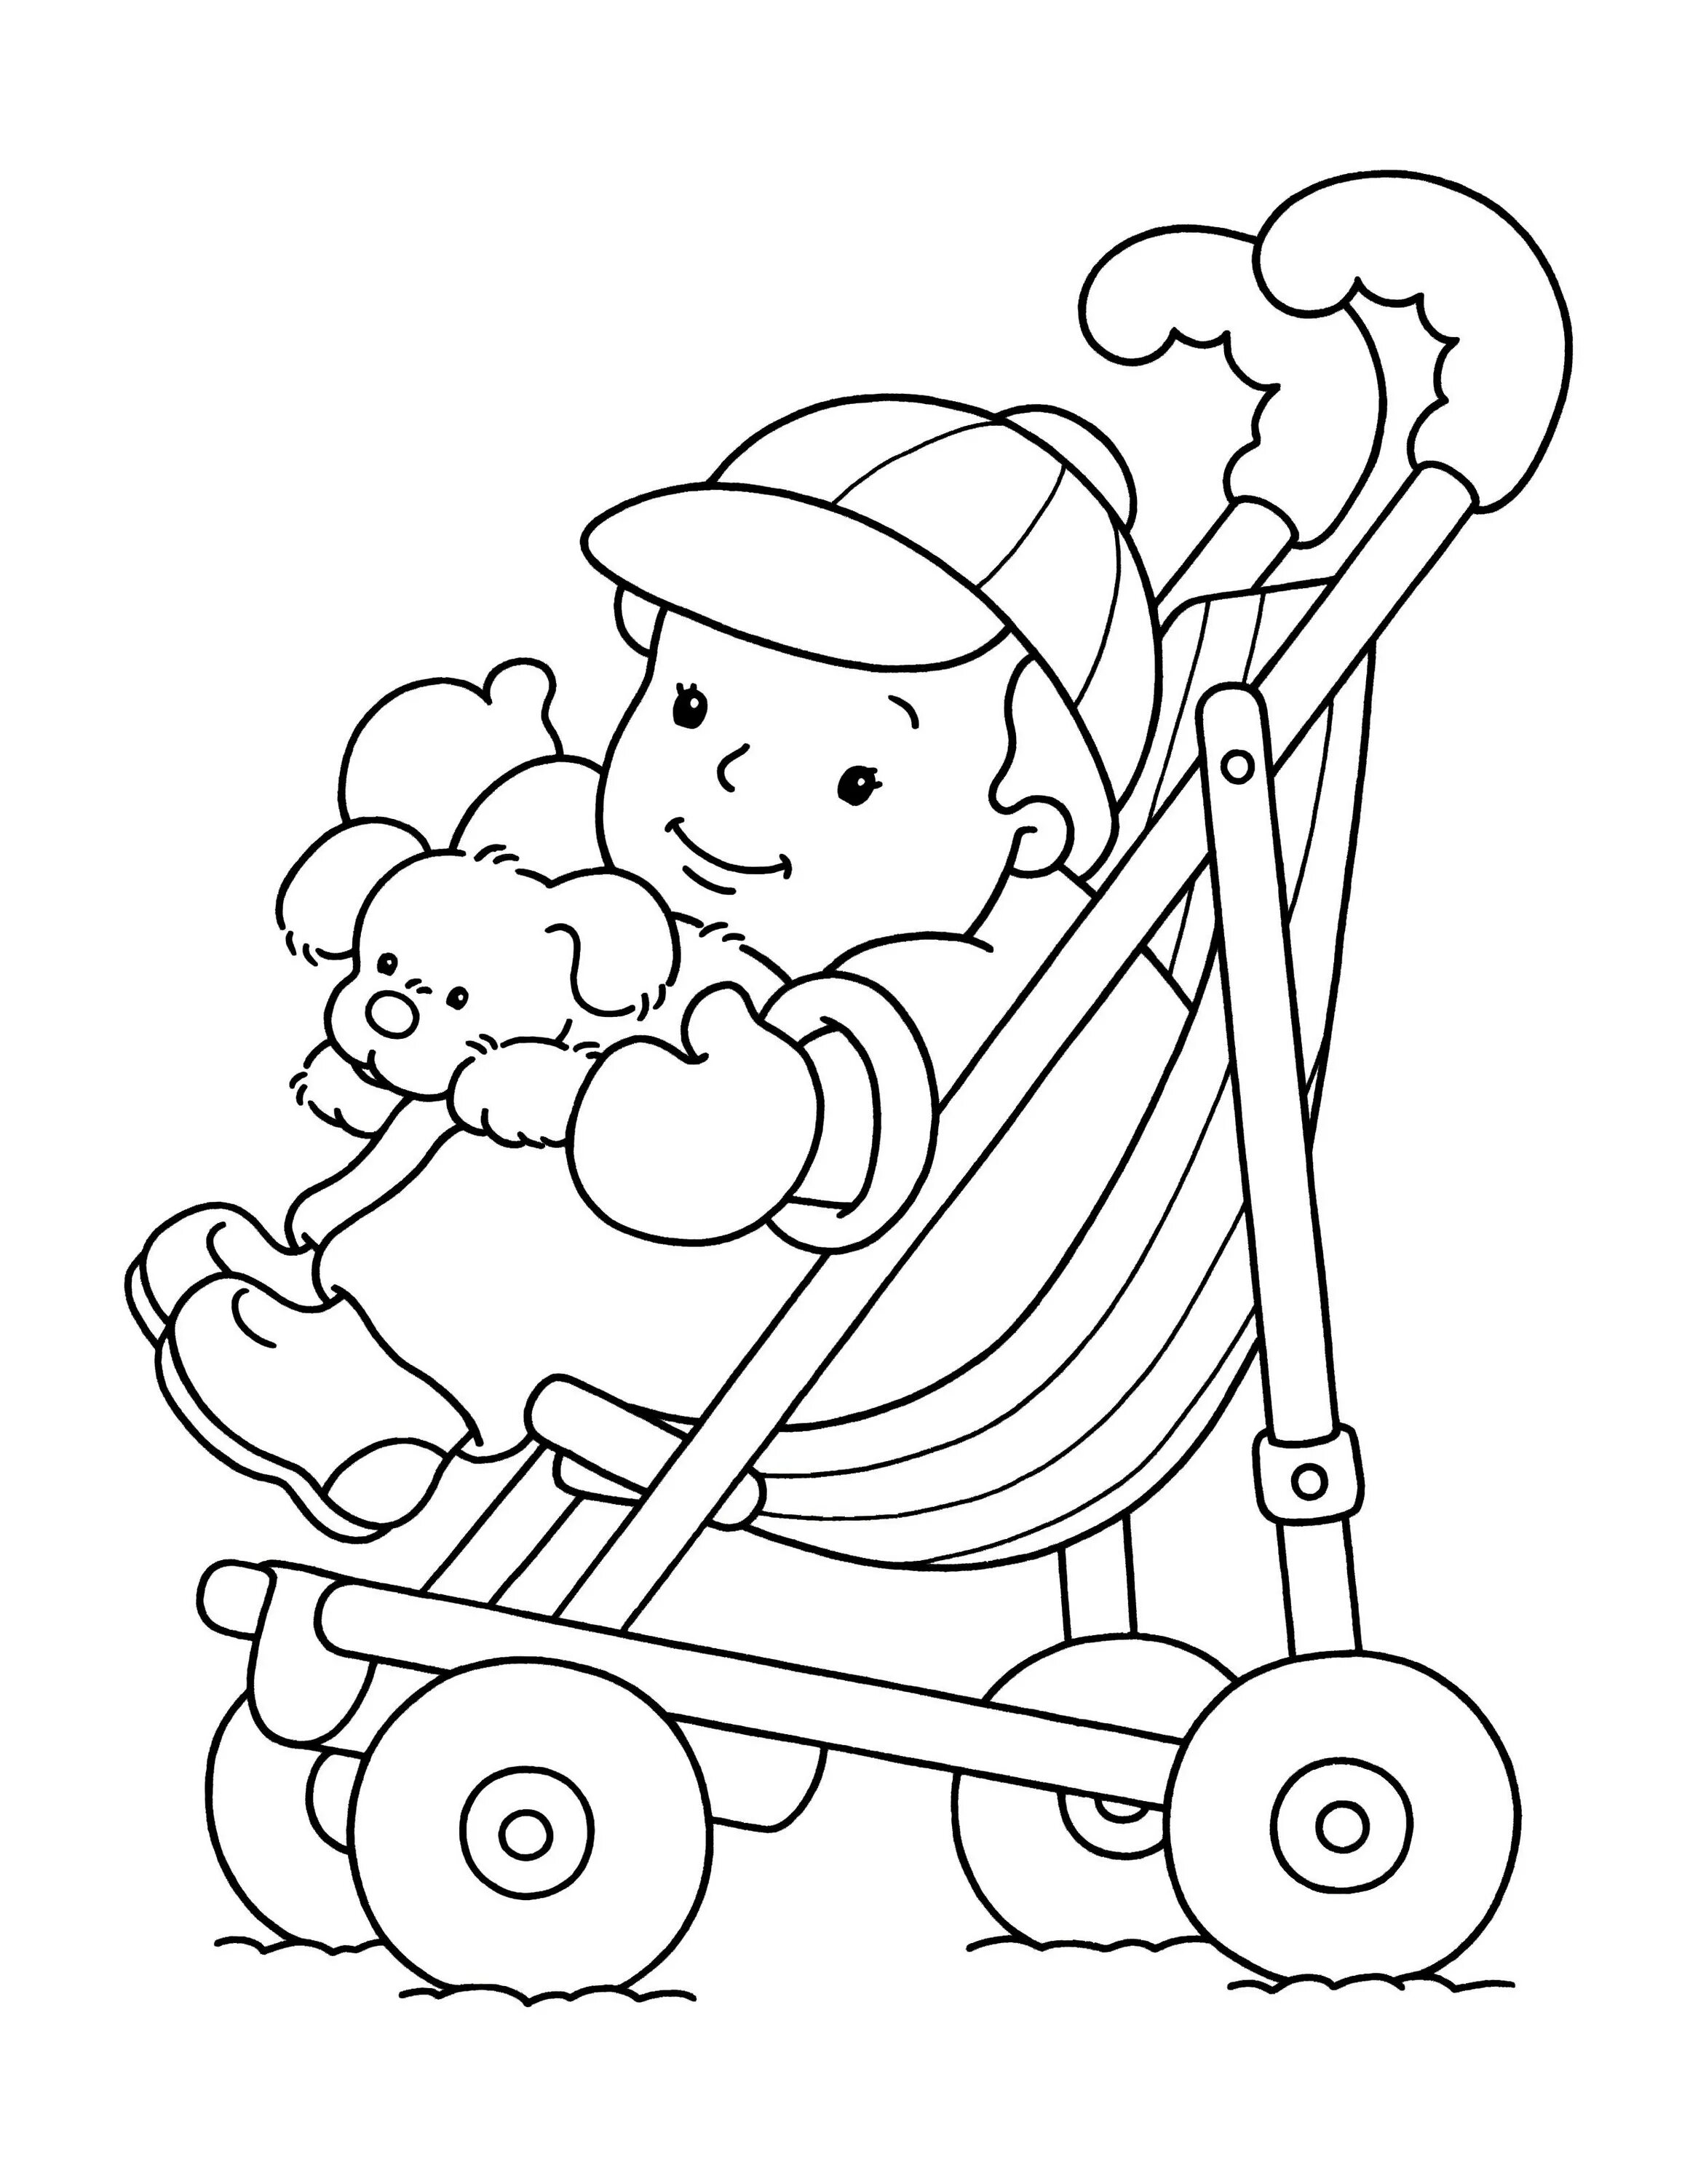 Shine baby dolls coloring pages